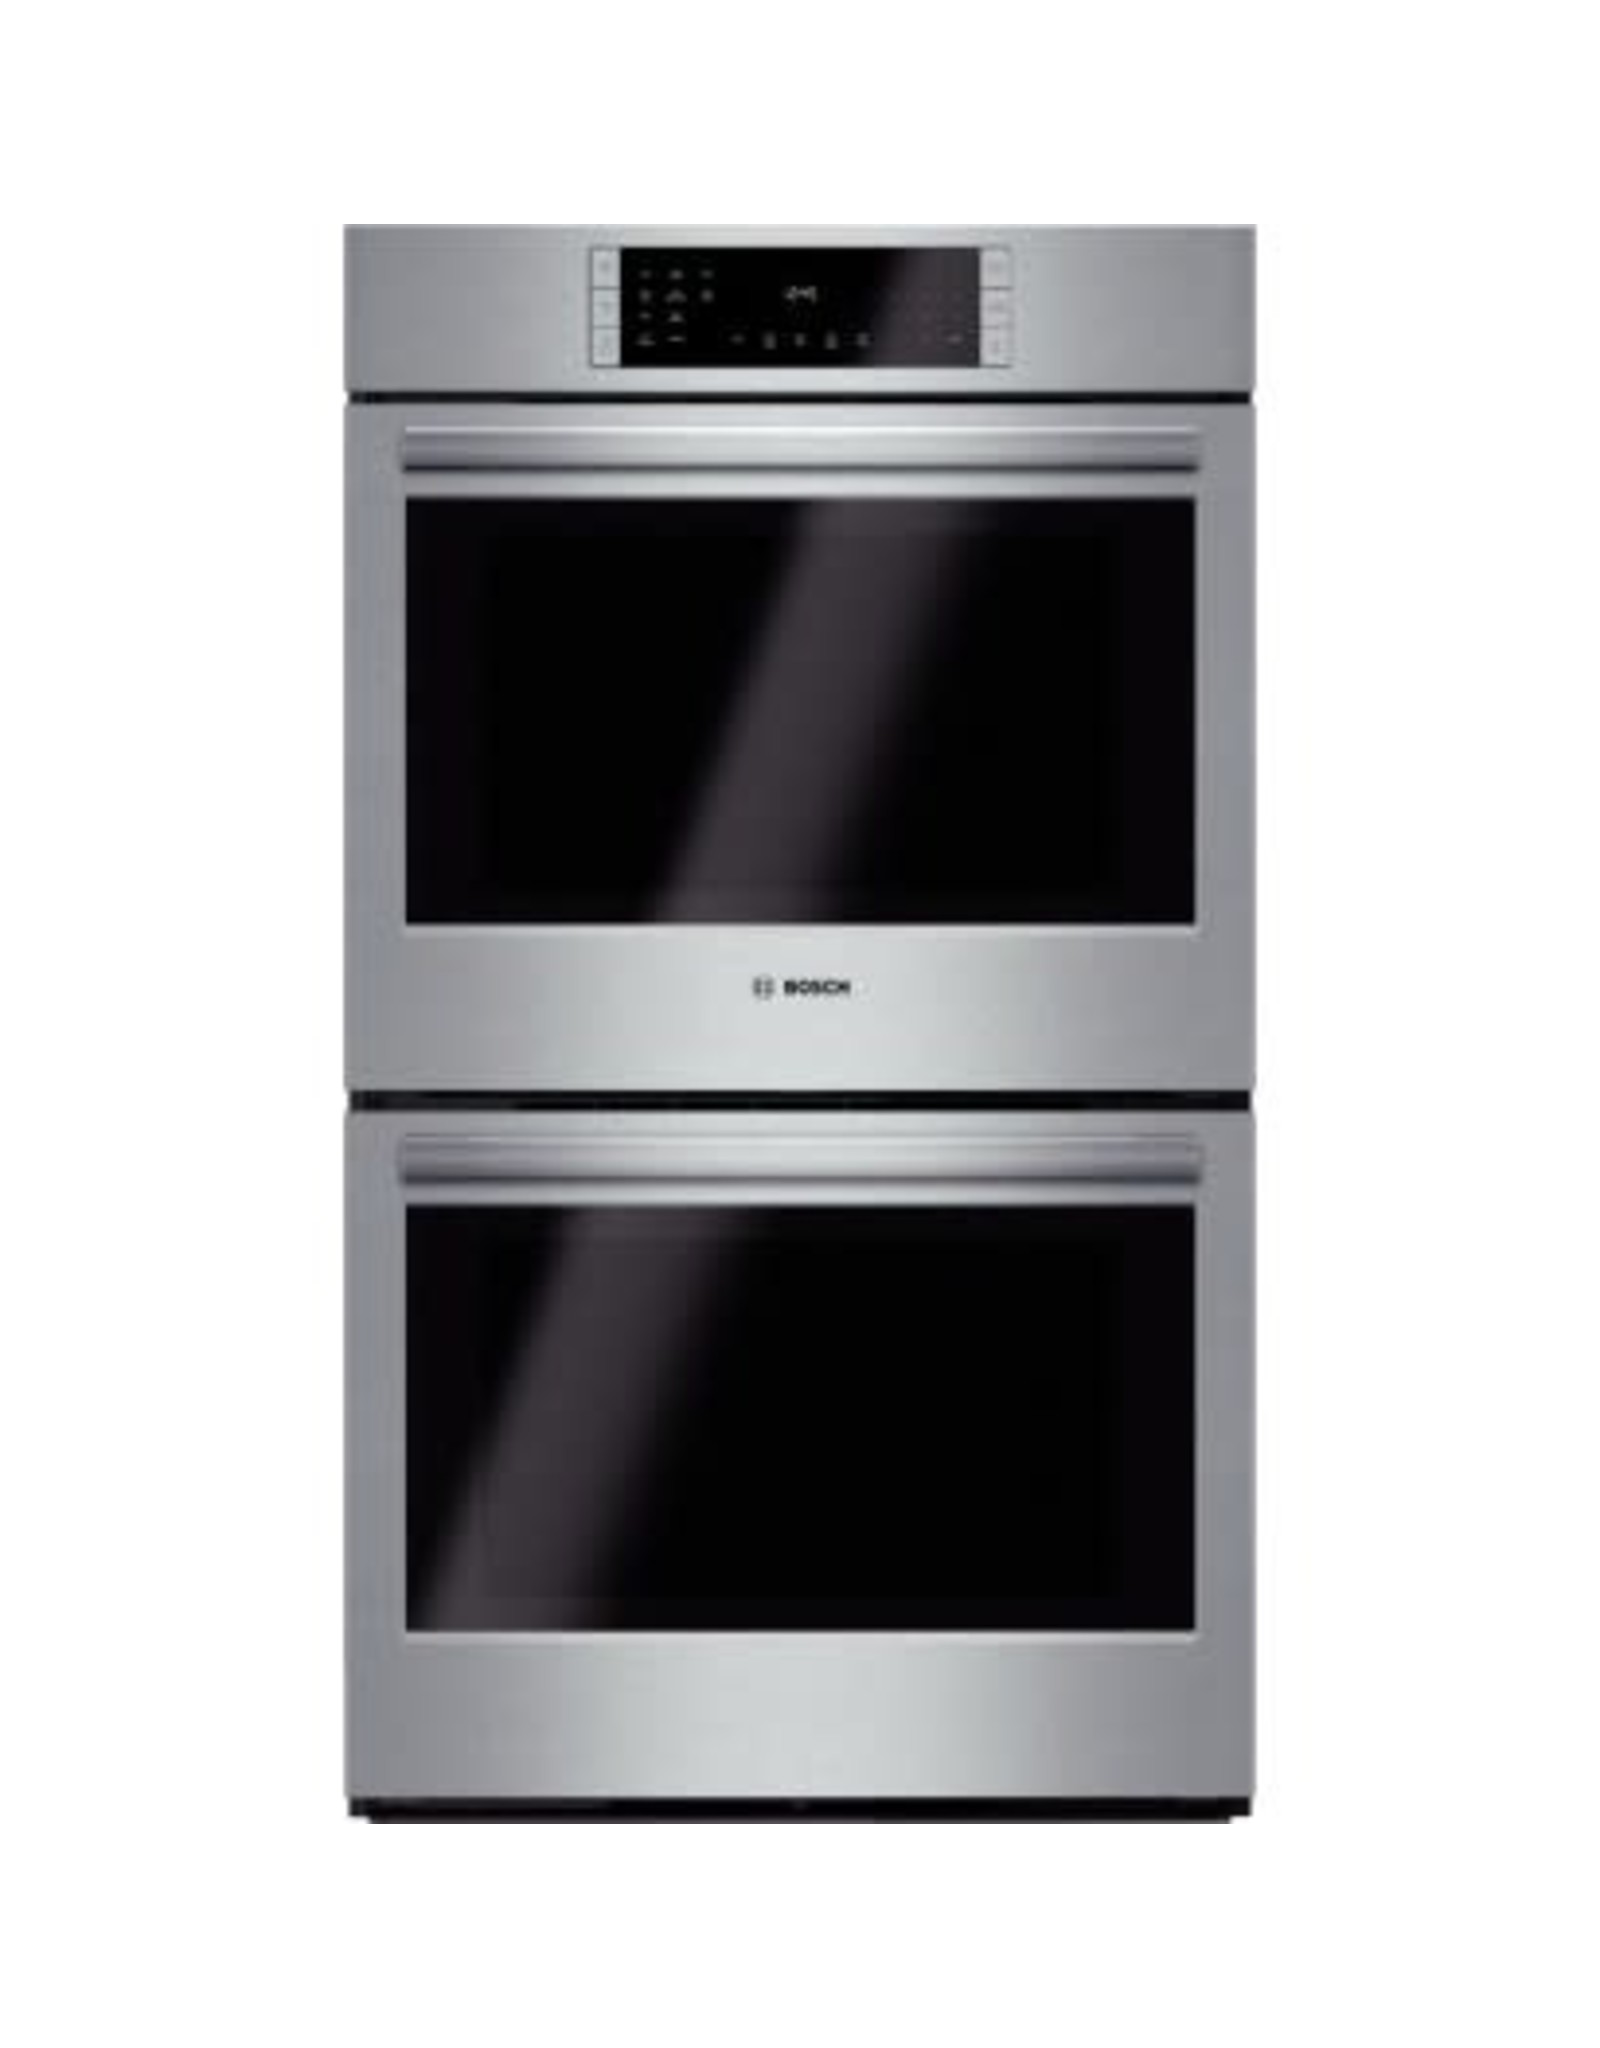 HBL8651UC 800 Series 30 in. Double Electric Wall Oven with European Convection in Stainless Steel Self Clean Touch Controls